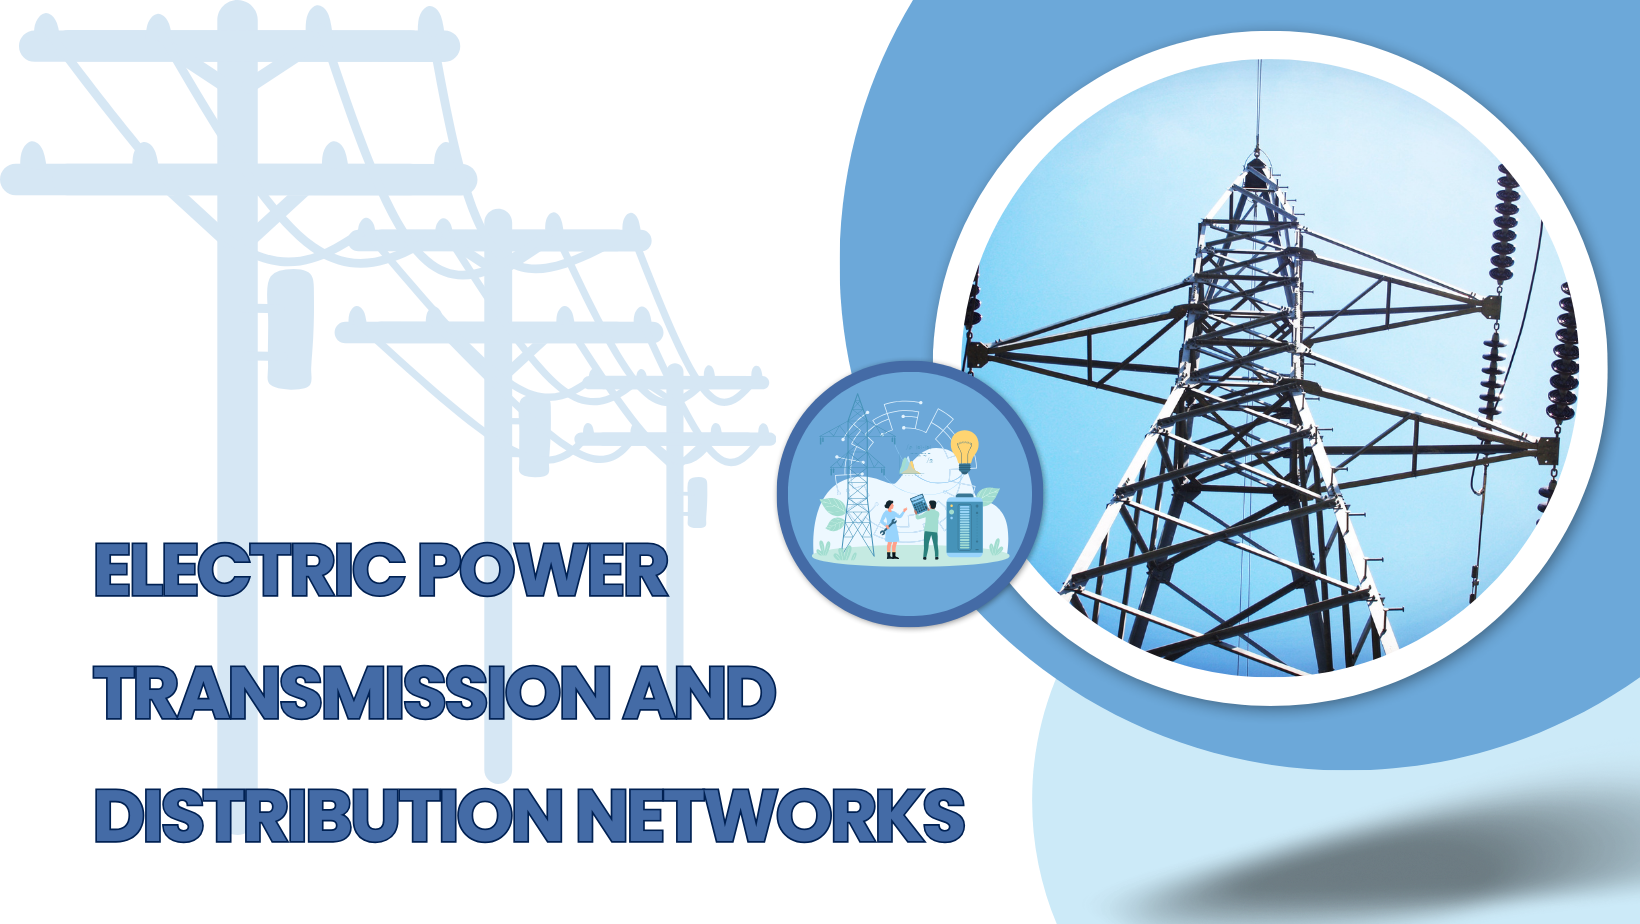 Electric power transmission and distribution networks EPTDN